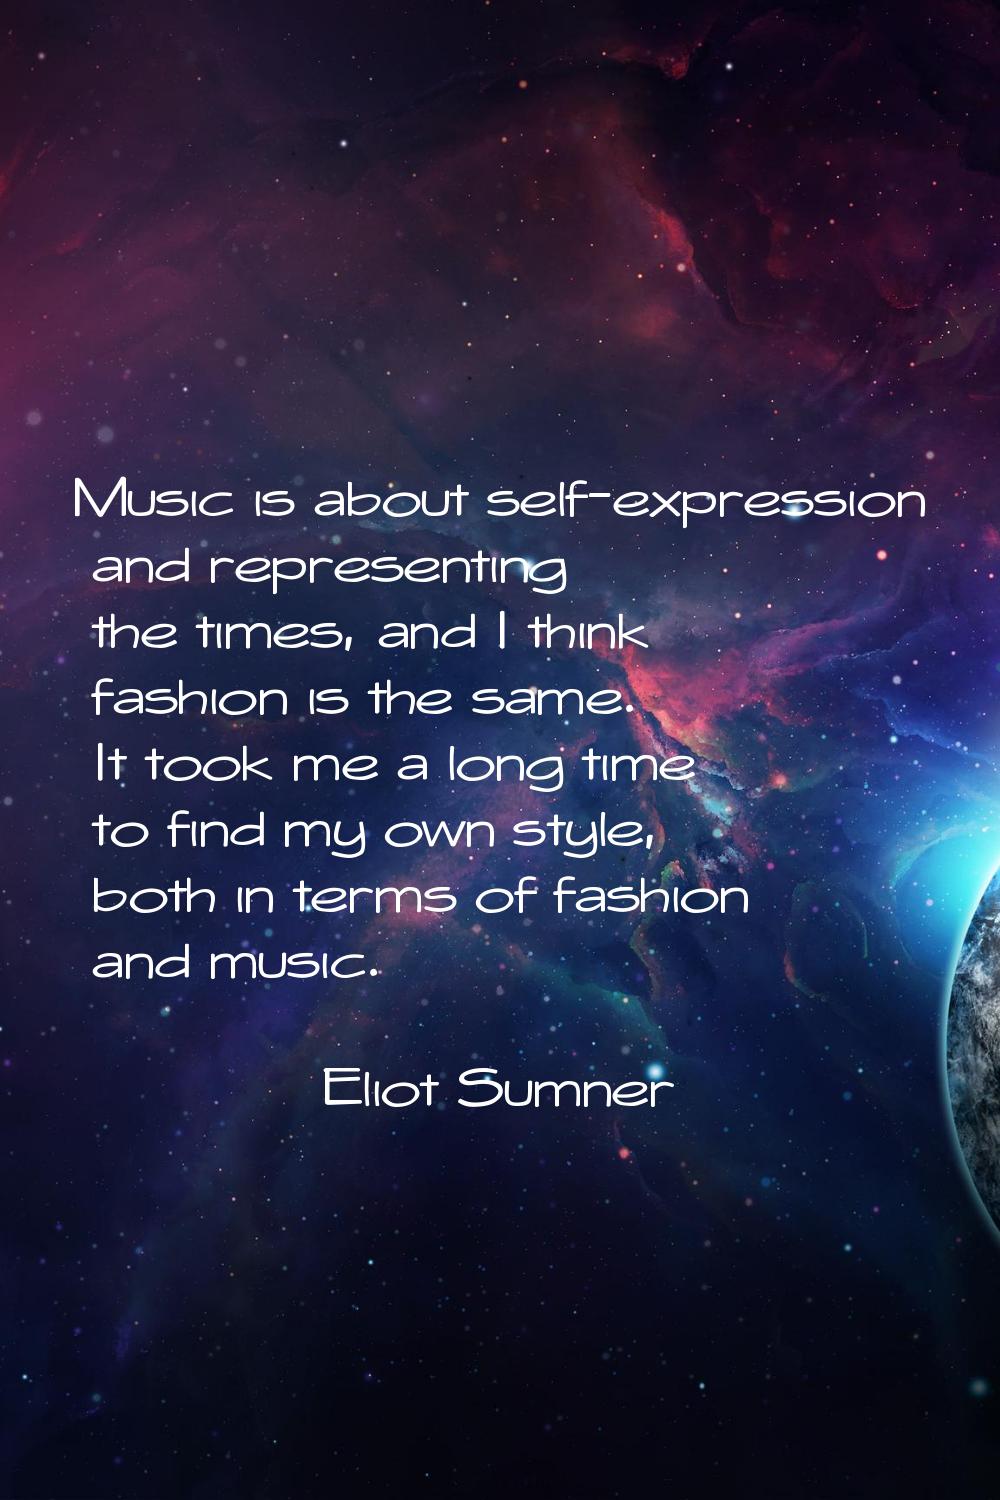 Music is about self-expression and representing the times, and I think fashion is the same. It took